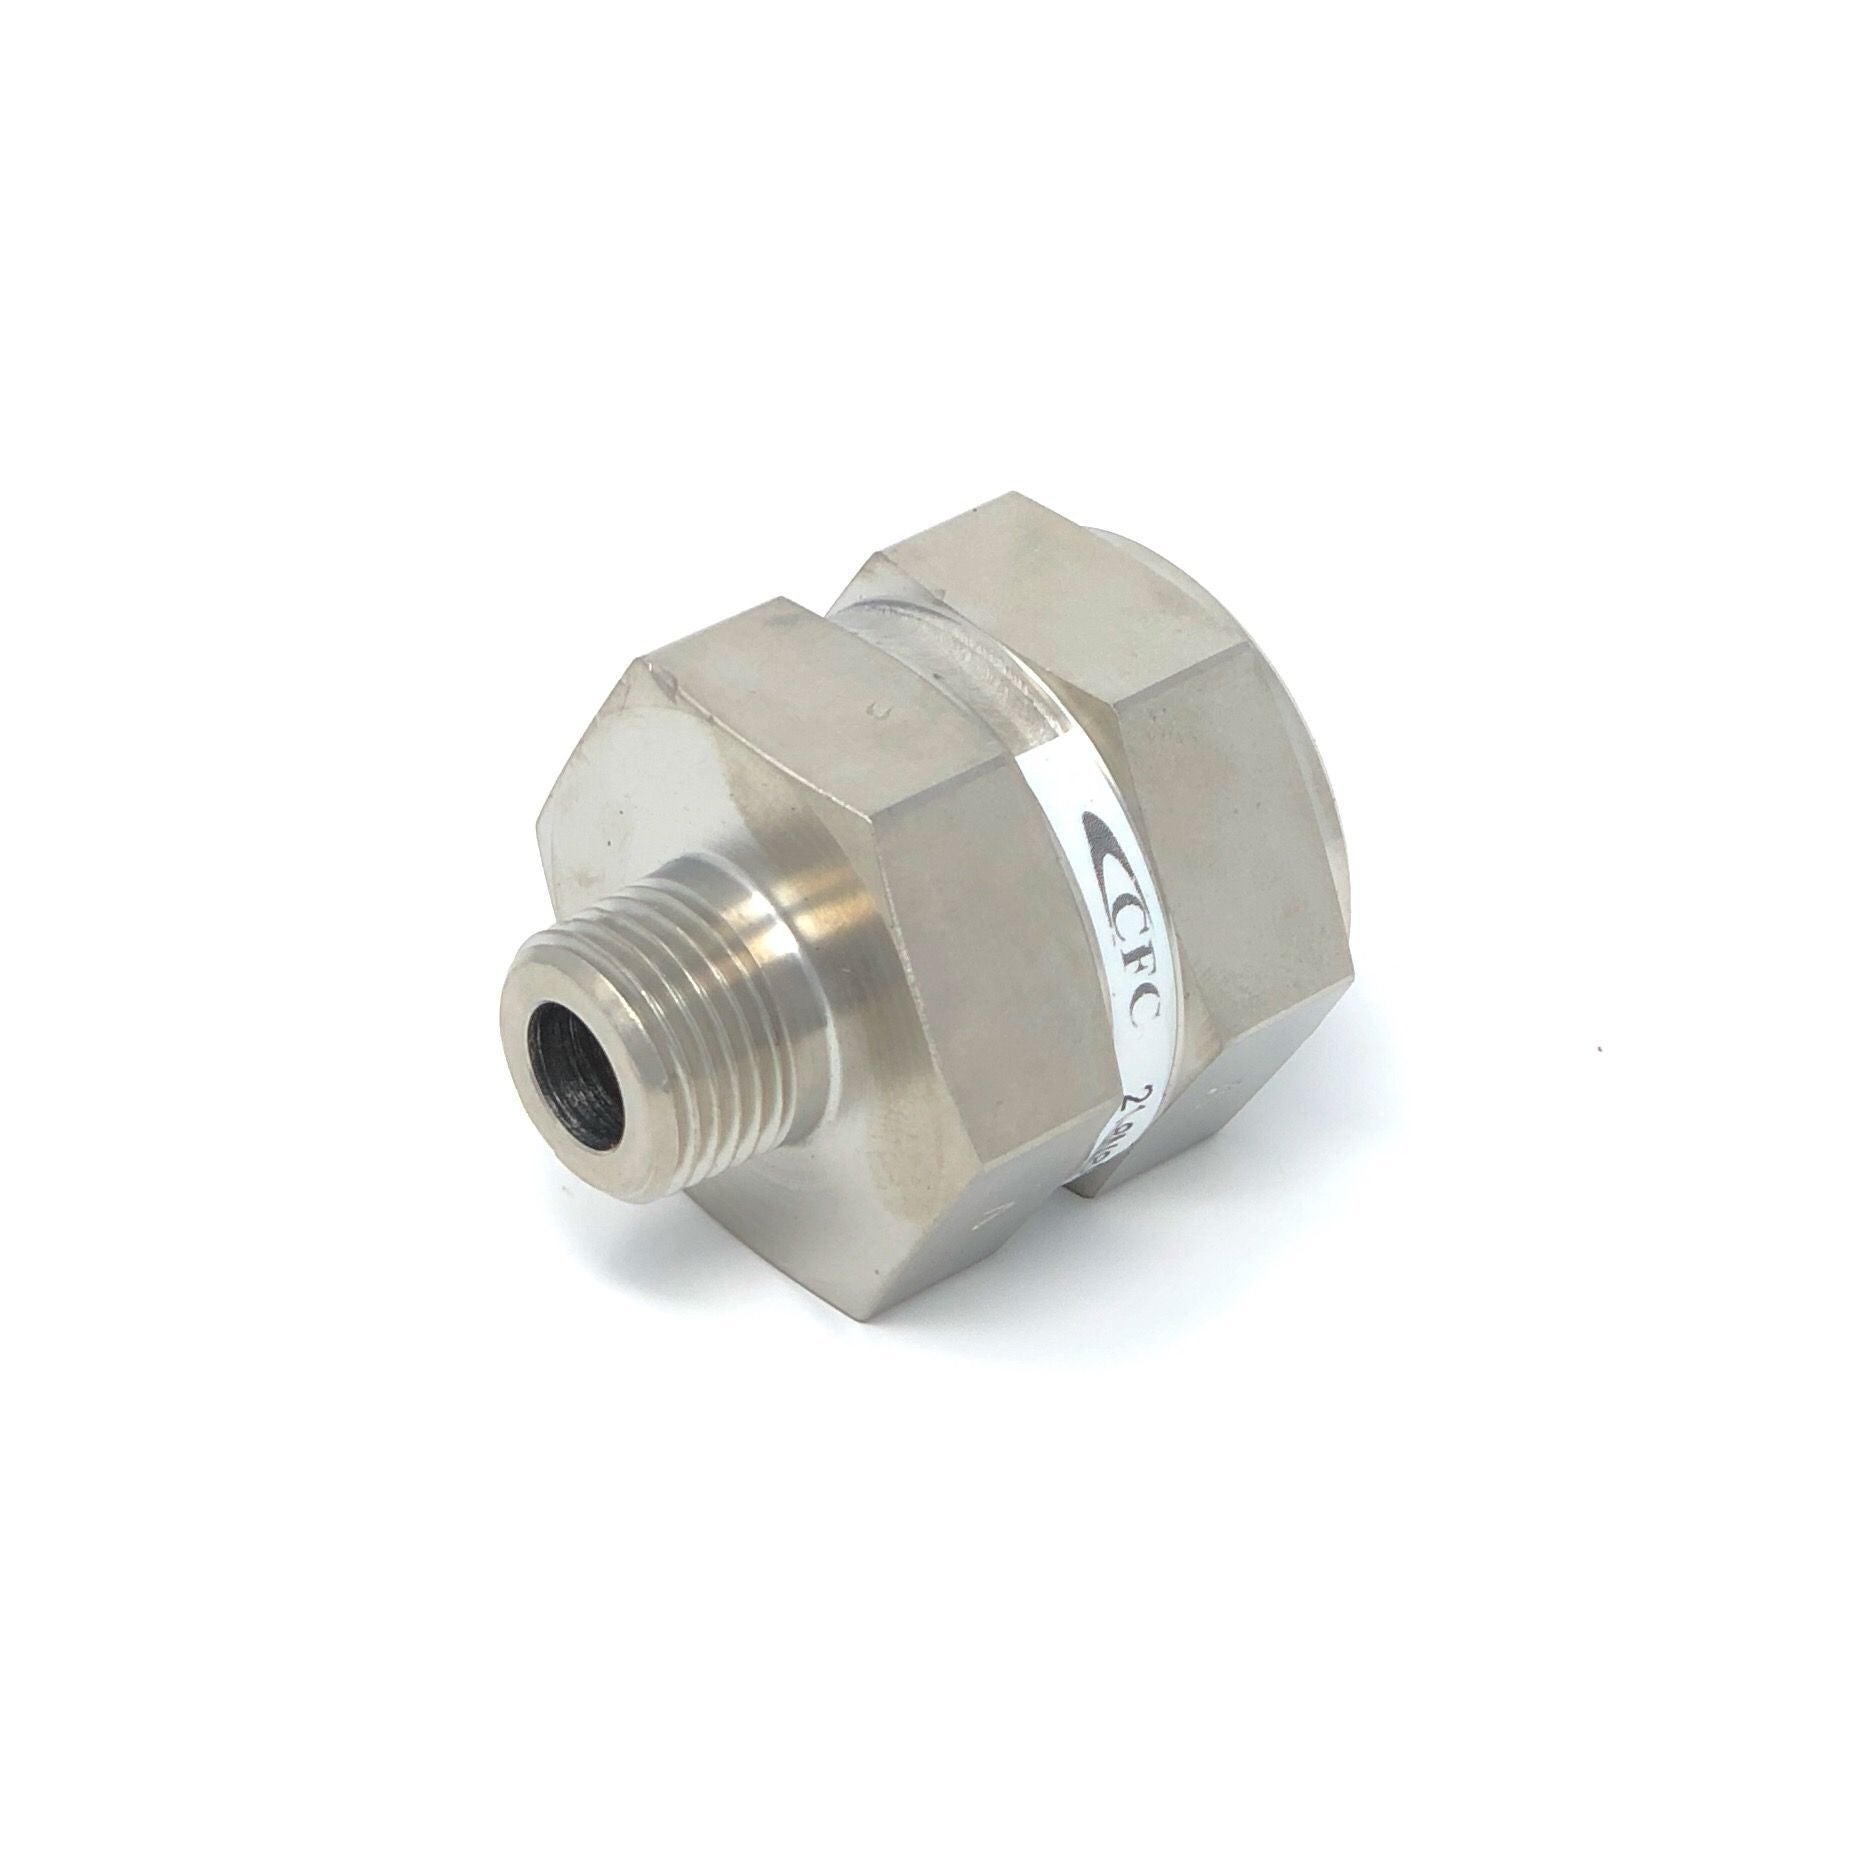 21-6M6M-25S : Chase High Pressure Inline Filter, 6000psi, #6 SAE (3/8"), 25 Micron, No Visual Indicator, No Bypass